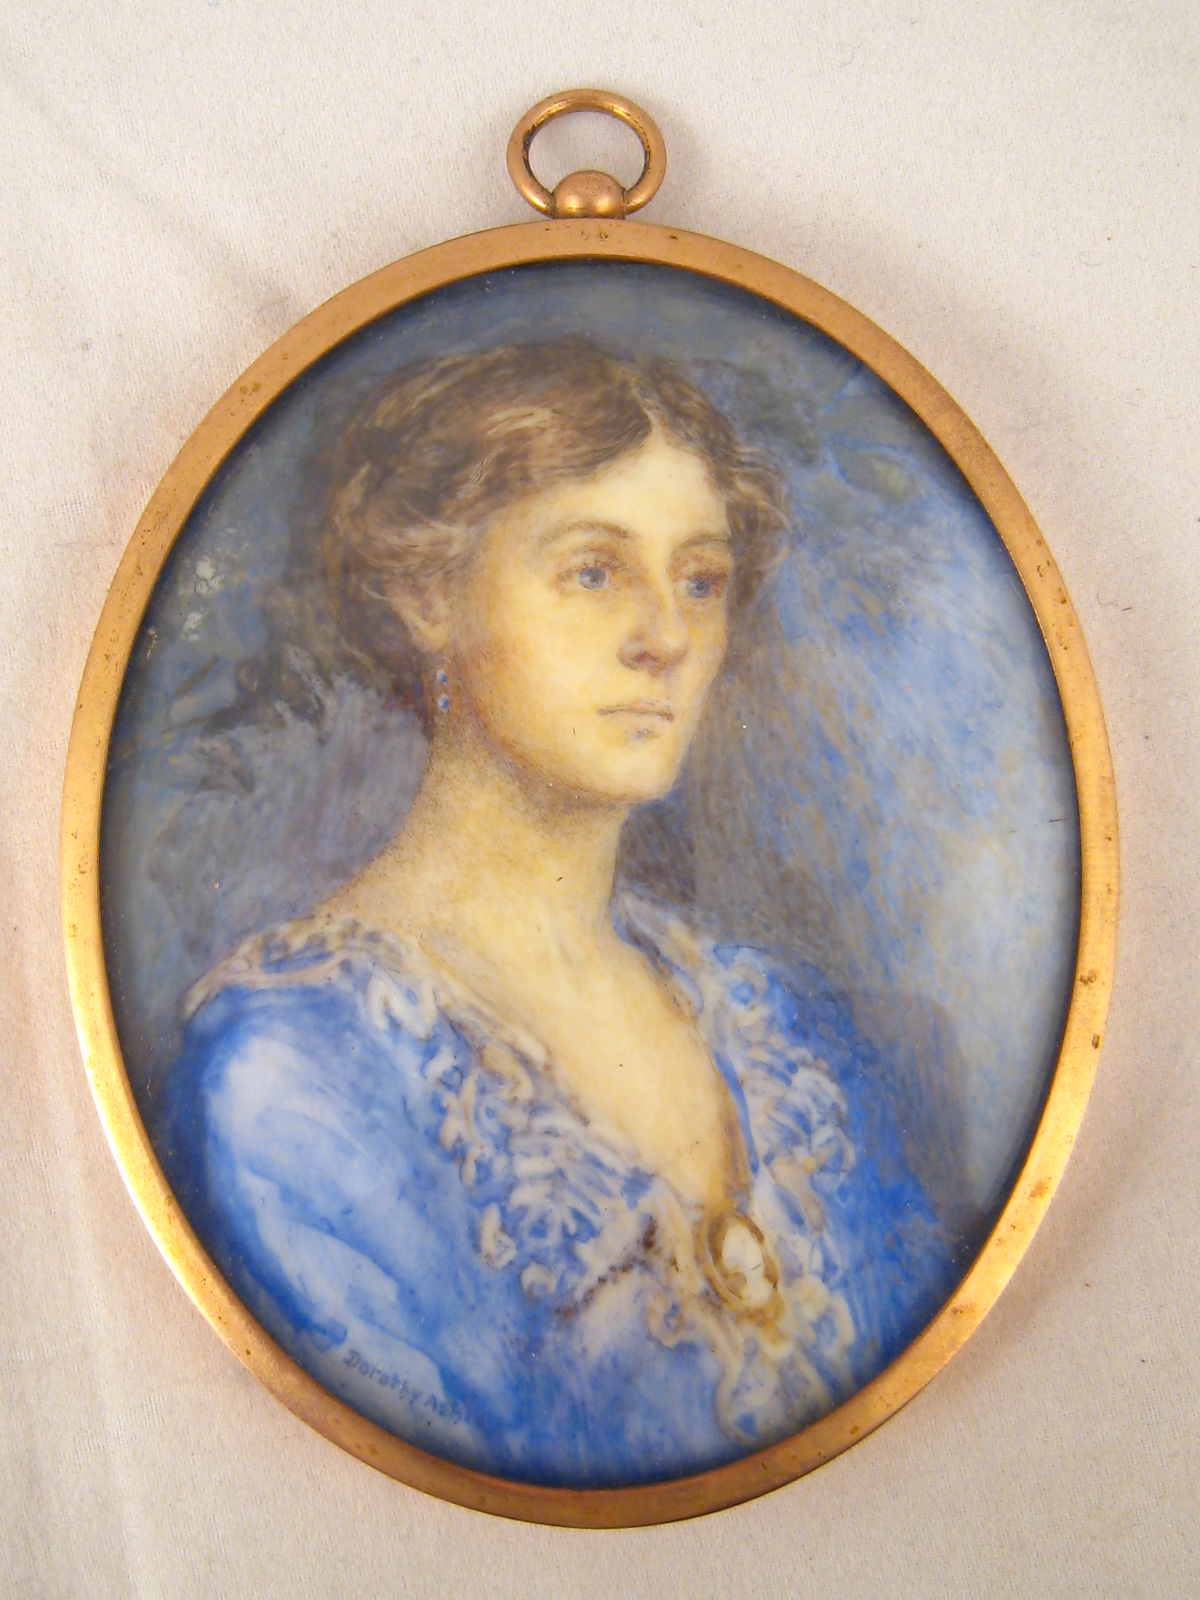 Three portrait miniatures, being a lady in Edwardian dress in a gilt oval frame, signed, 7x9cm, in